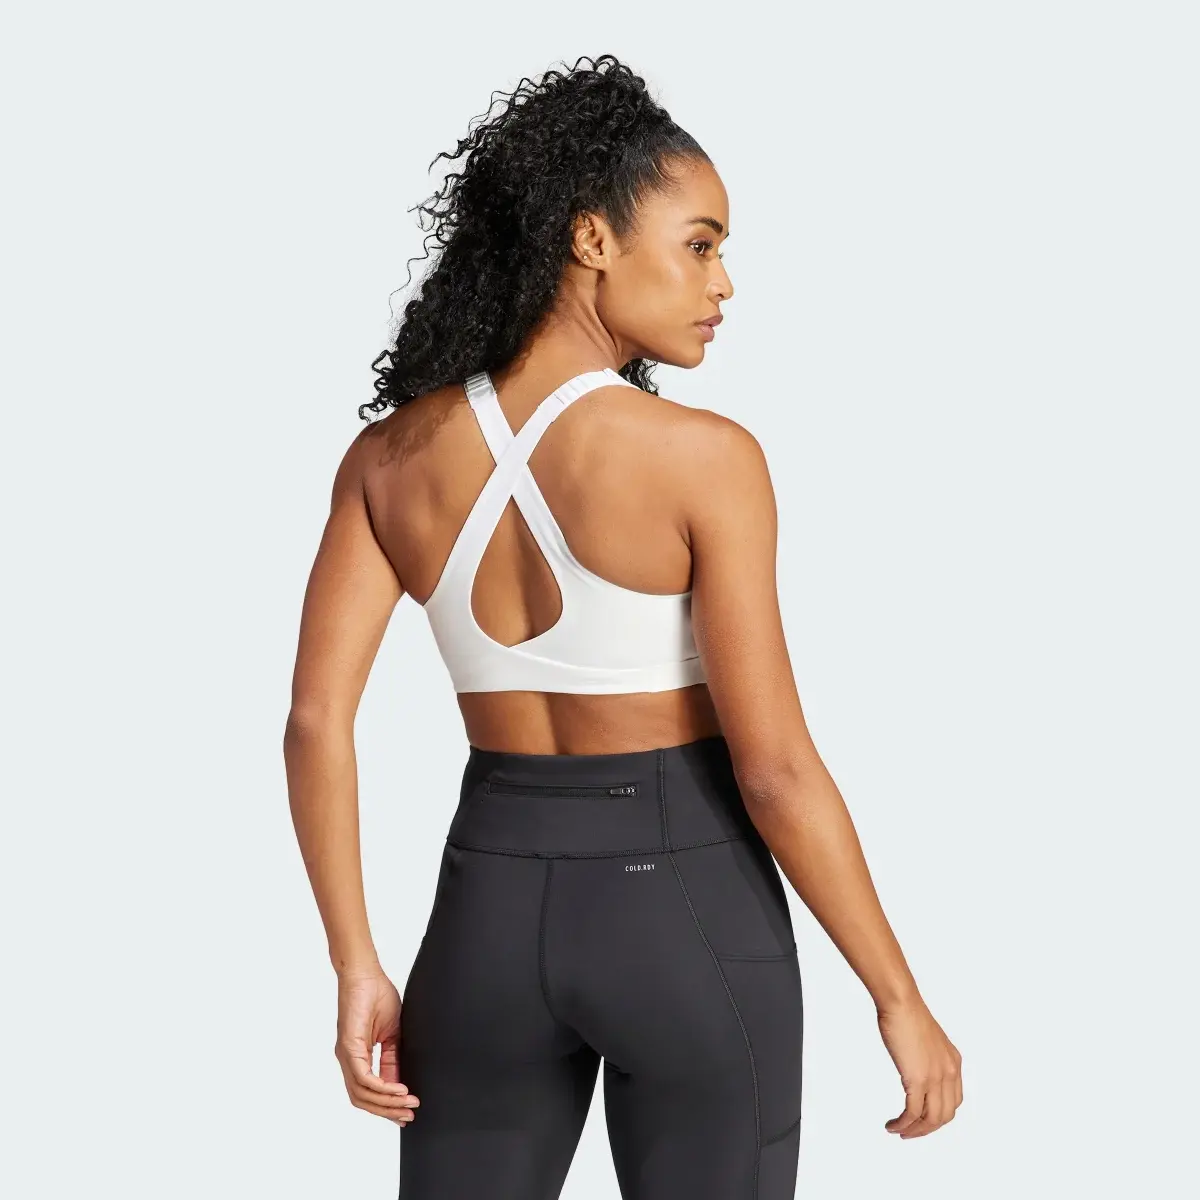 Adidas Collective Power Fastimpact Luxe High-Support Bra. 3